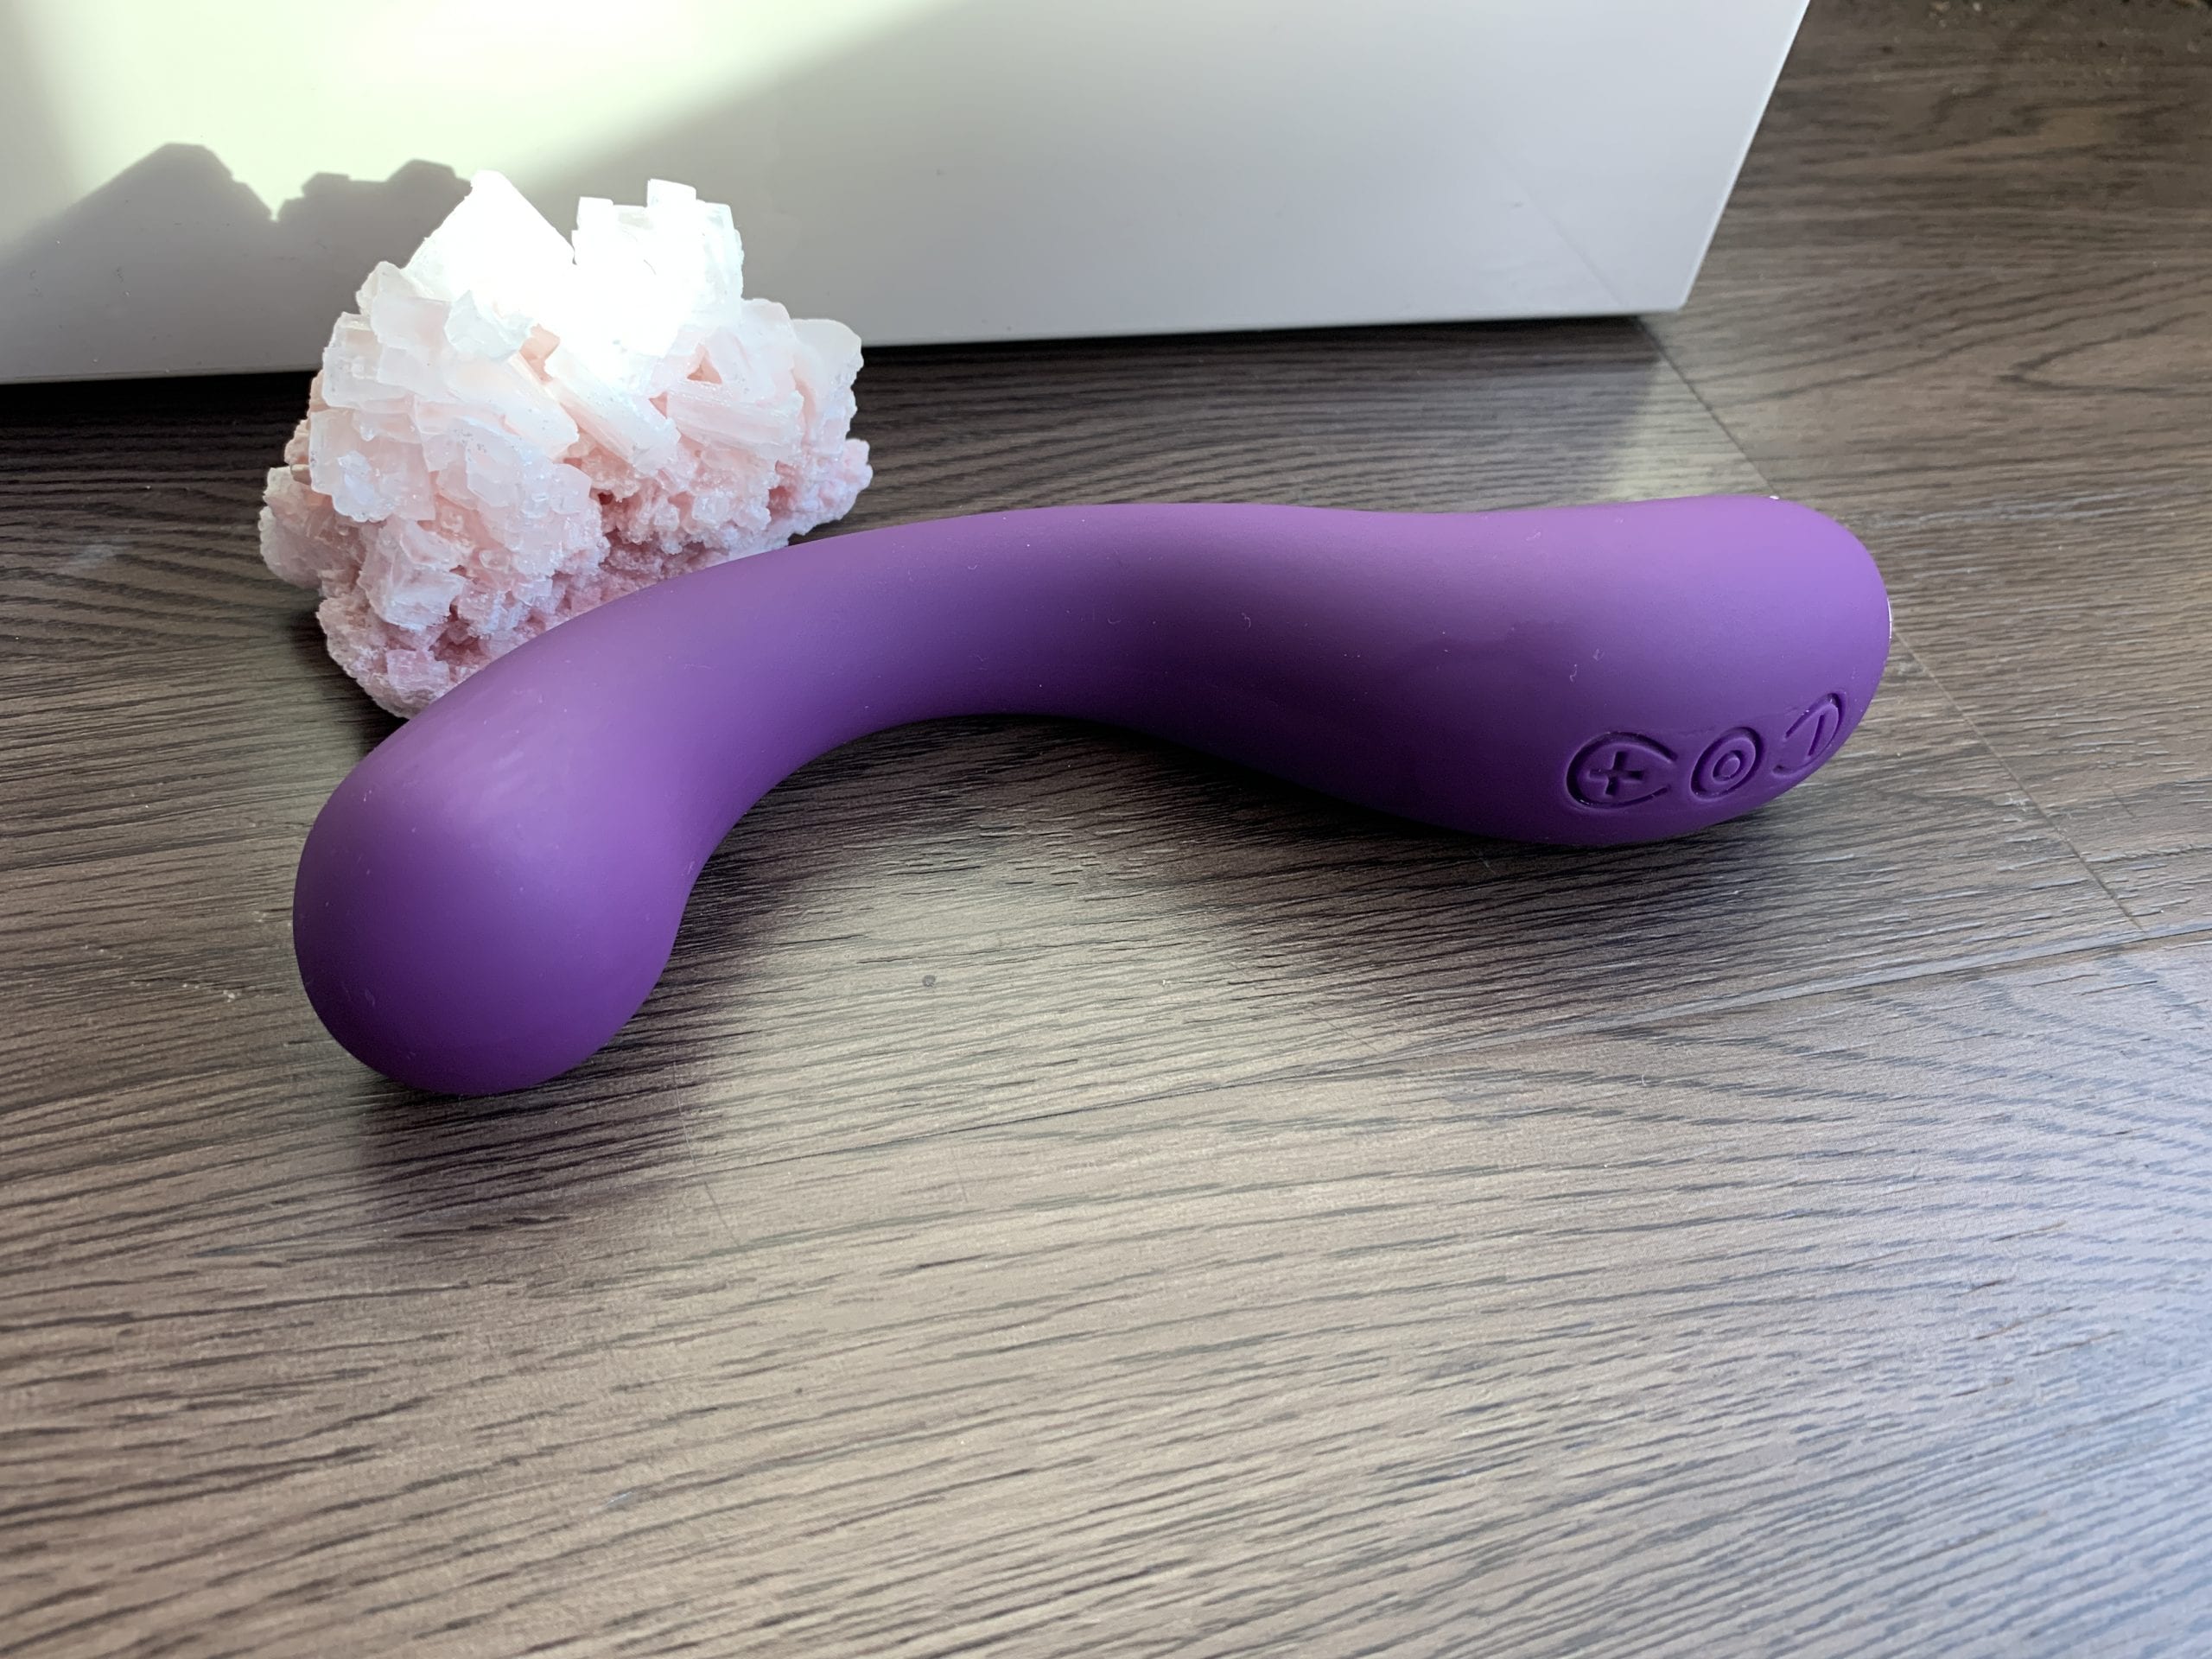 REVIEW: Desire Luxury Rechargeable Curved G-Spot Vibrator